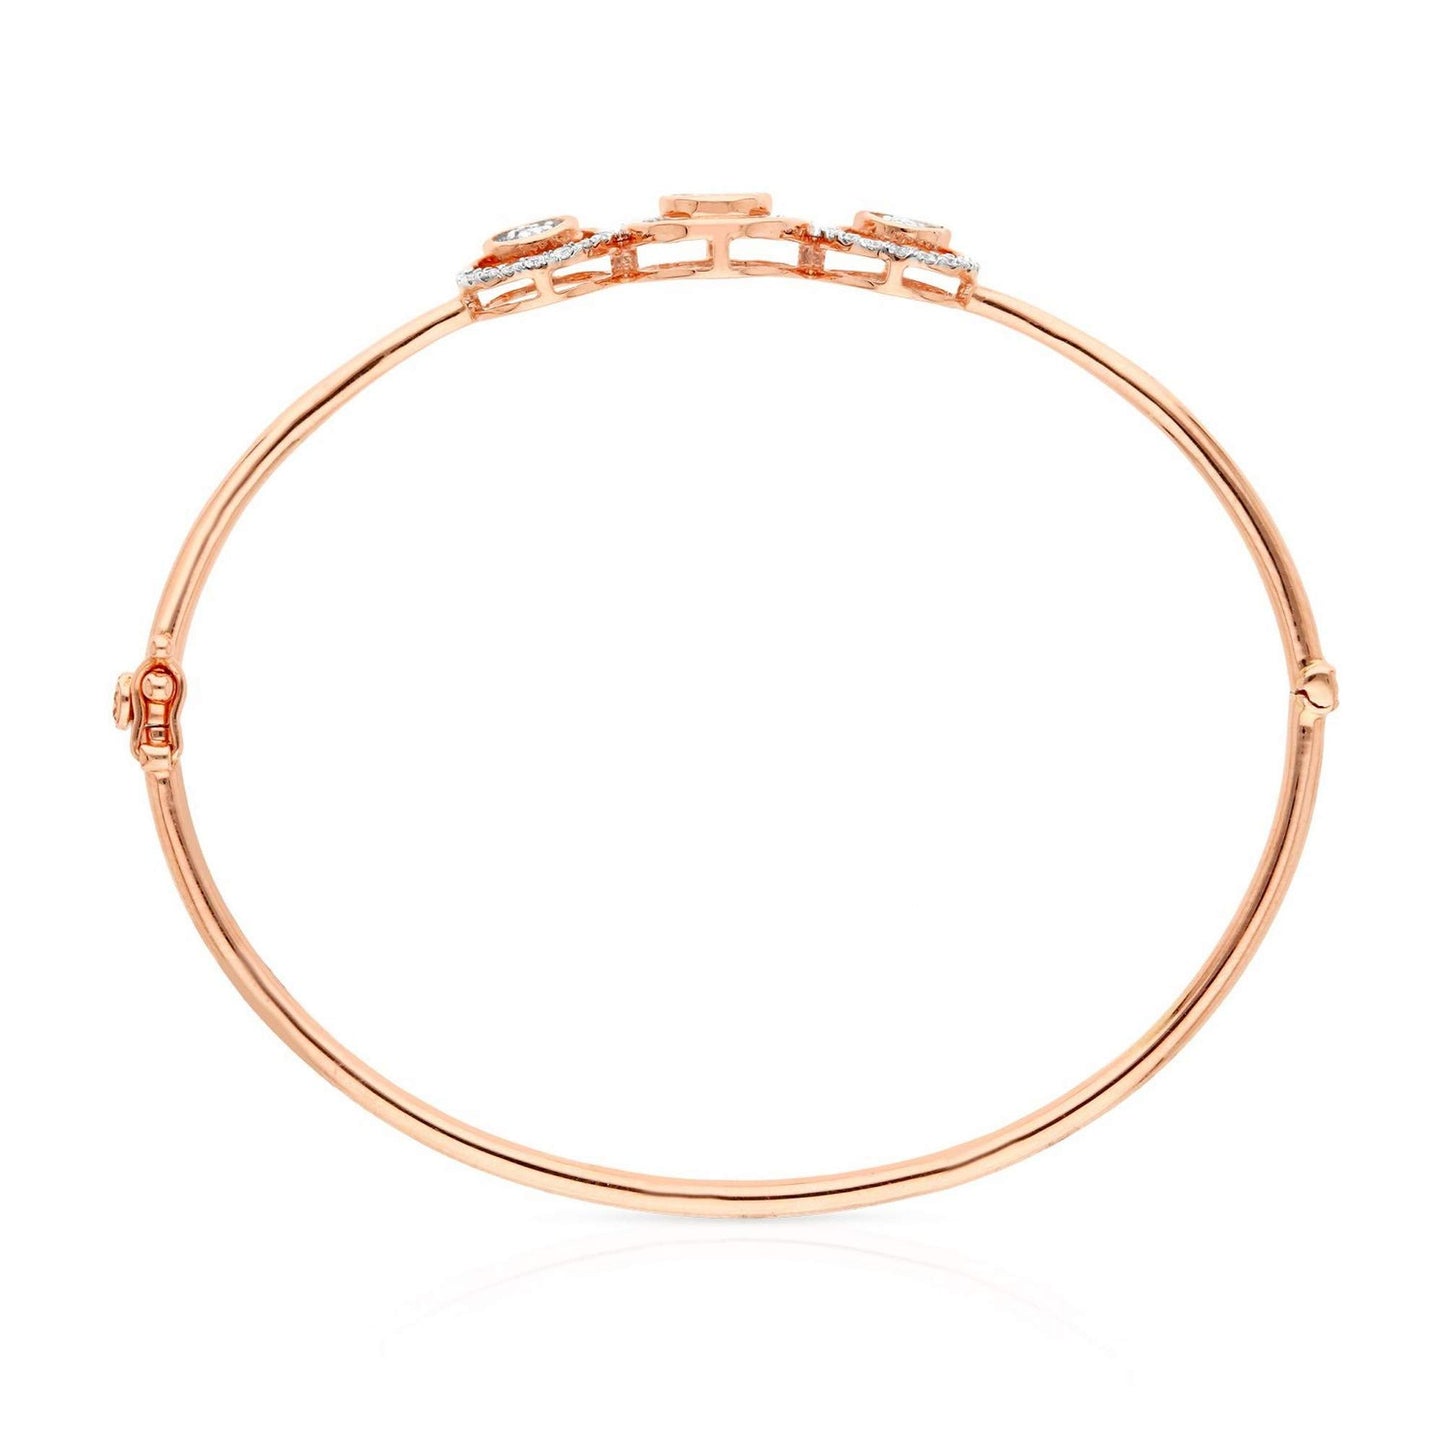 Malabar Gold & Diamonds 18k (750) Rose Gold and Solitaire Bangle for Women